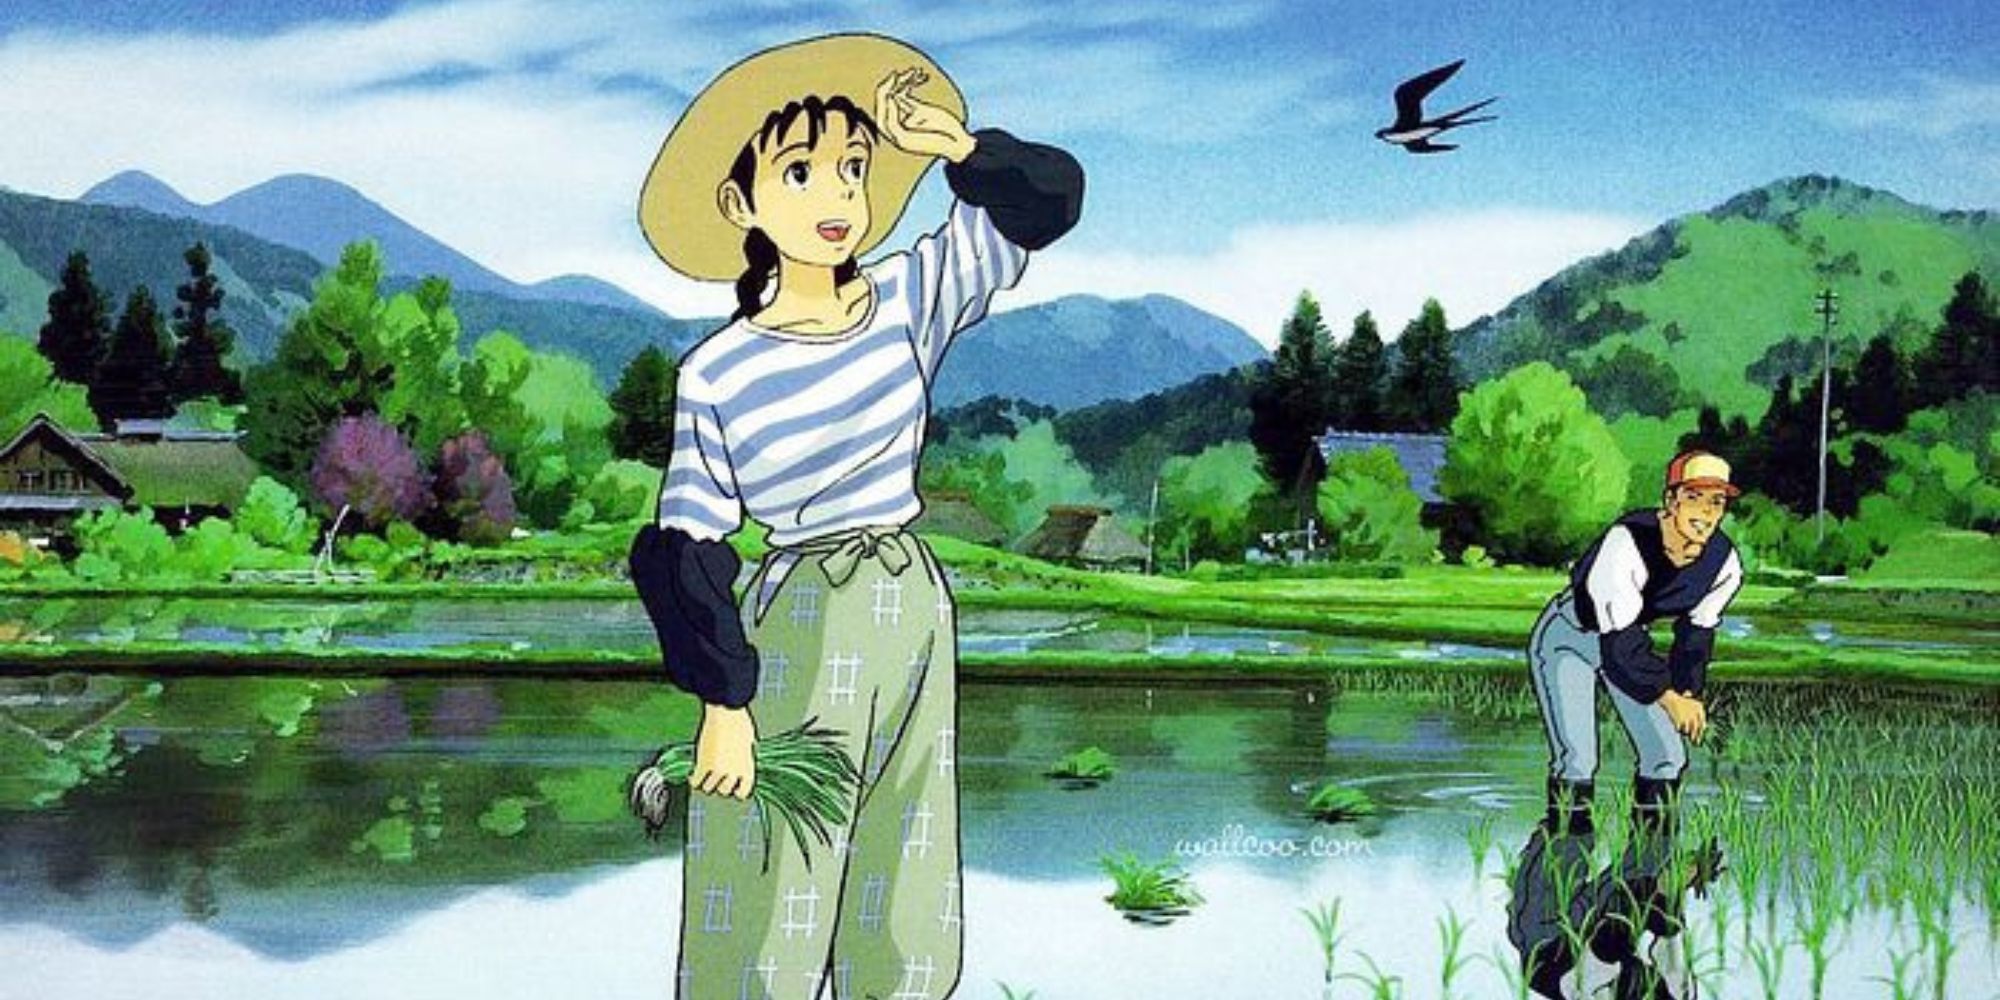 Only Yesterday protagonist planting rice